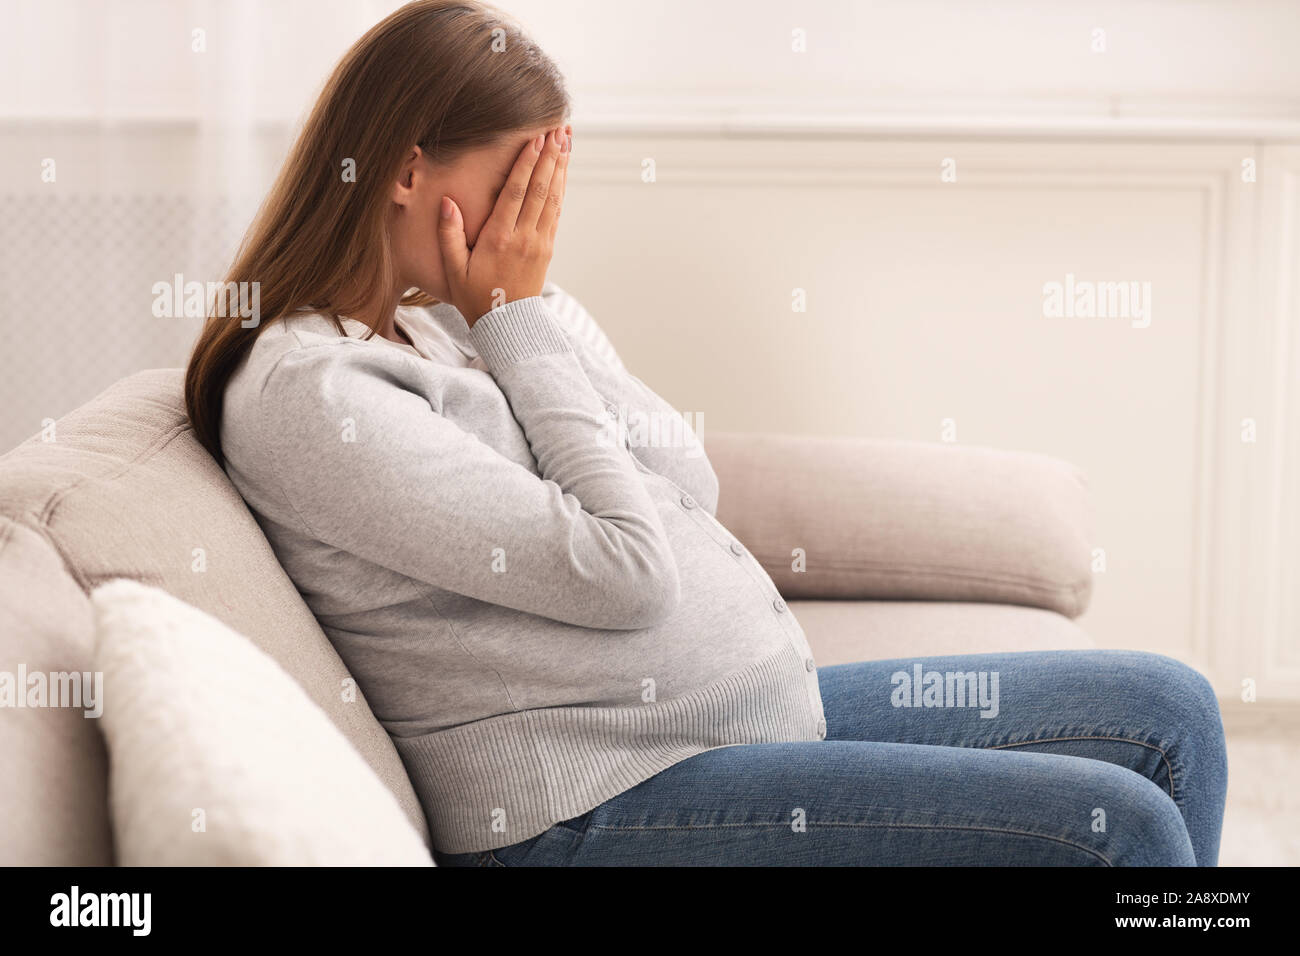 Pregnant Lady Crying Covering Face With Hands Sitting At Home Stock Photo